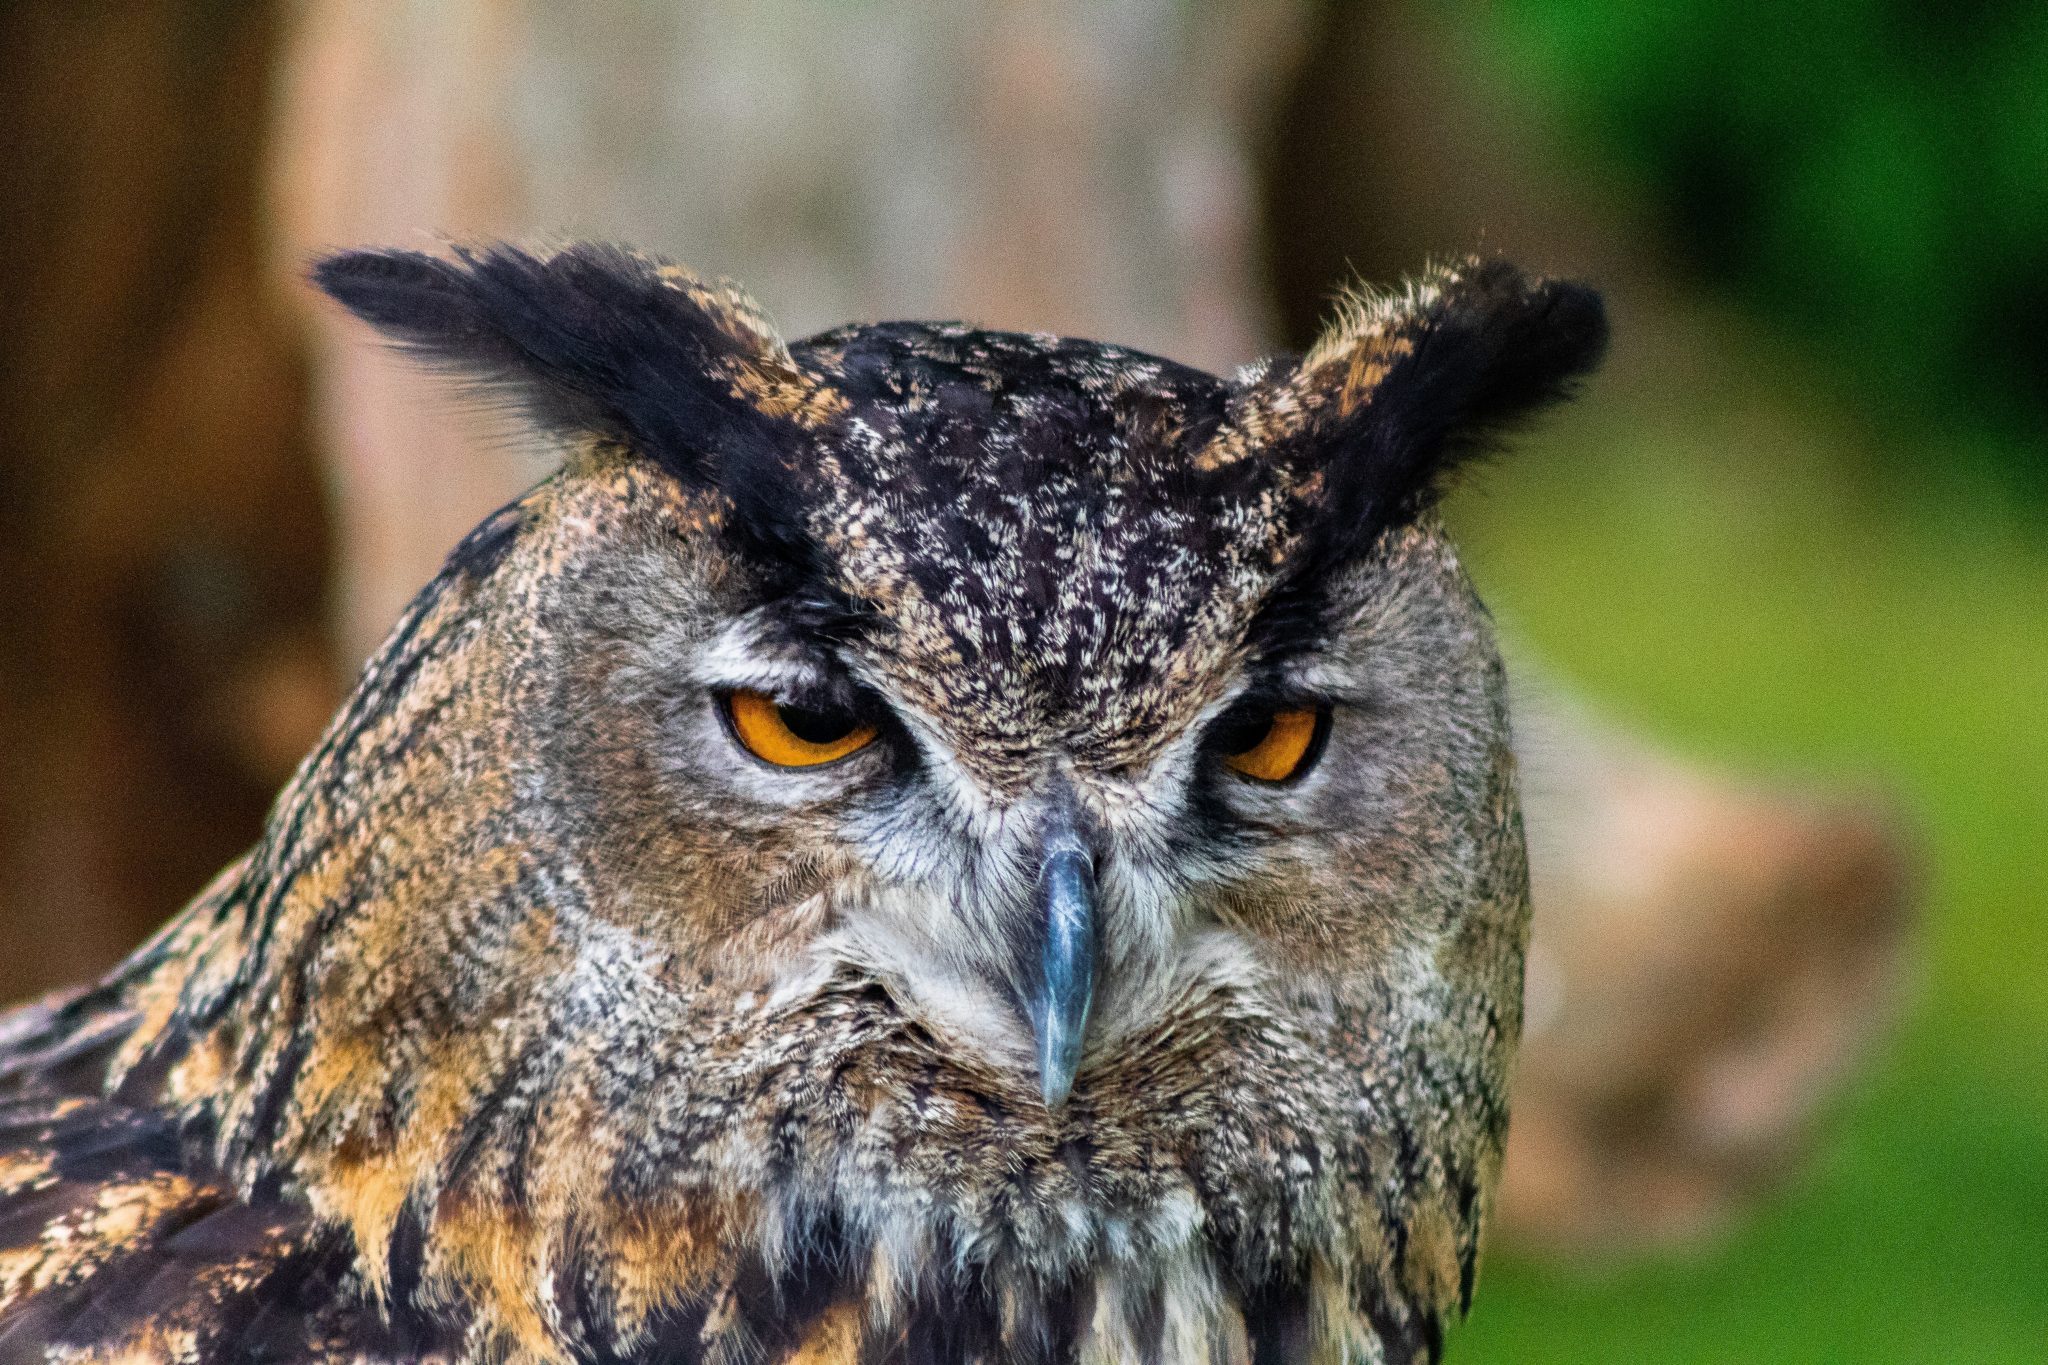 Why You Shouldn't Keep an Owl as a Pet | Reader's Digest